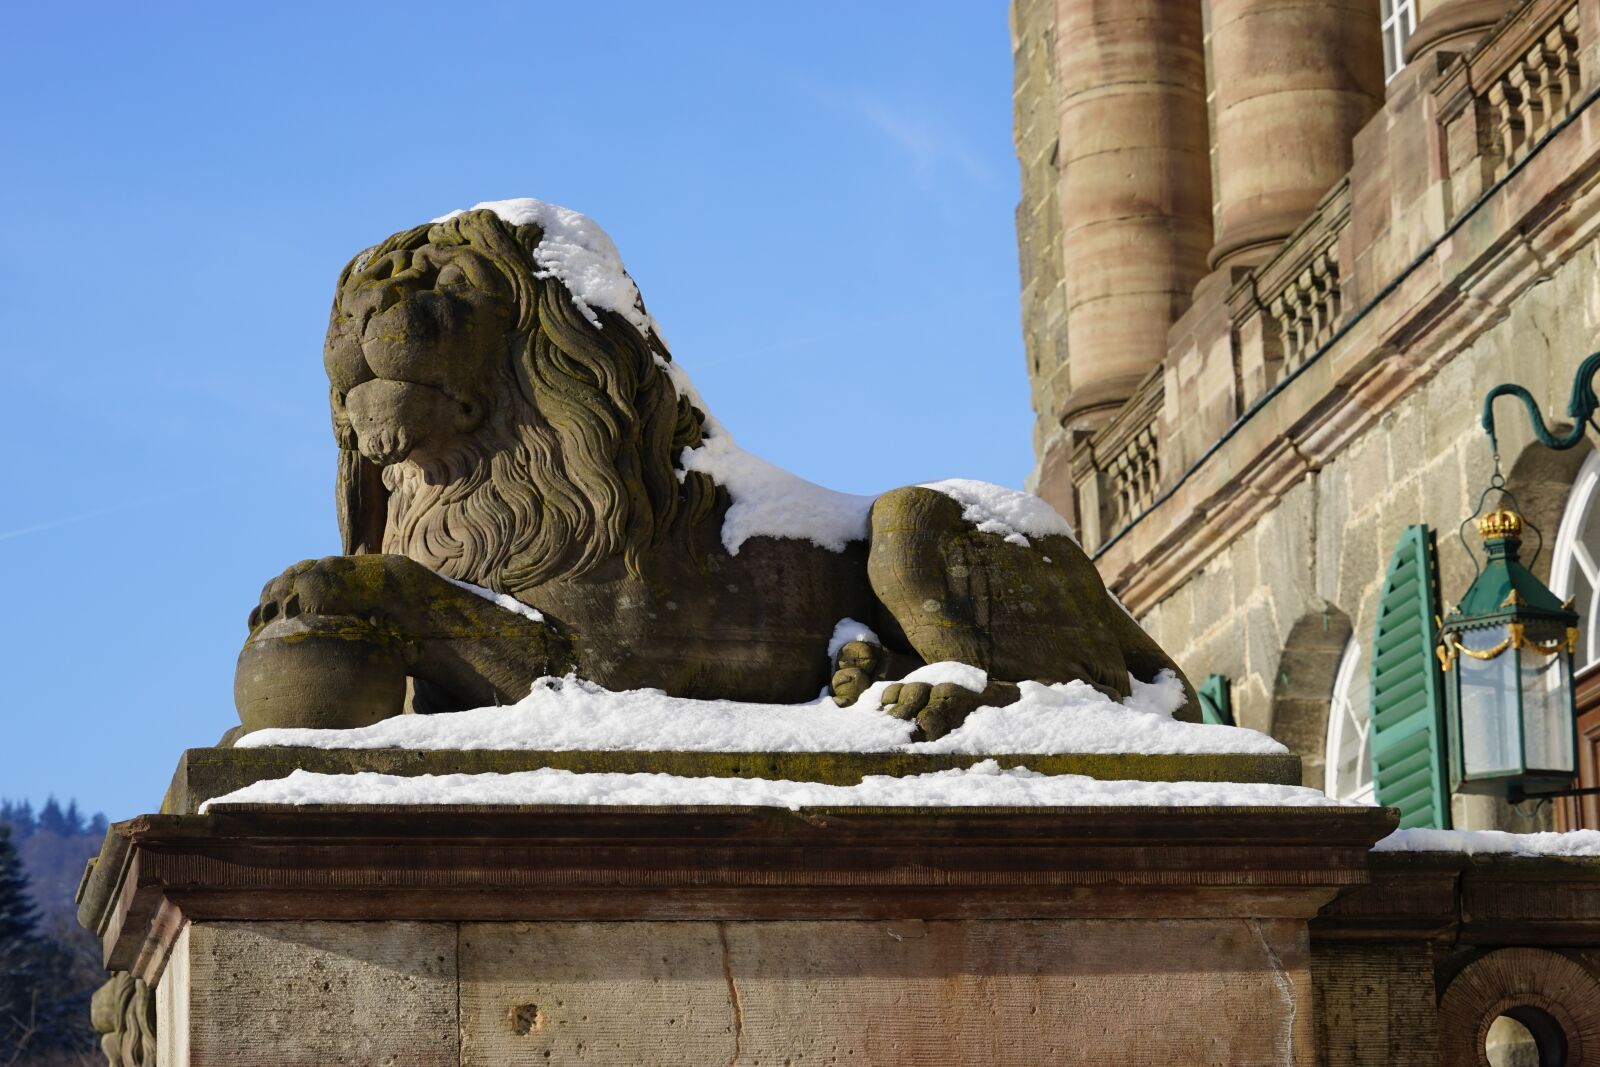 Sony a7 sample photo. Lion, stone sculpture, statue photography